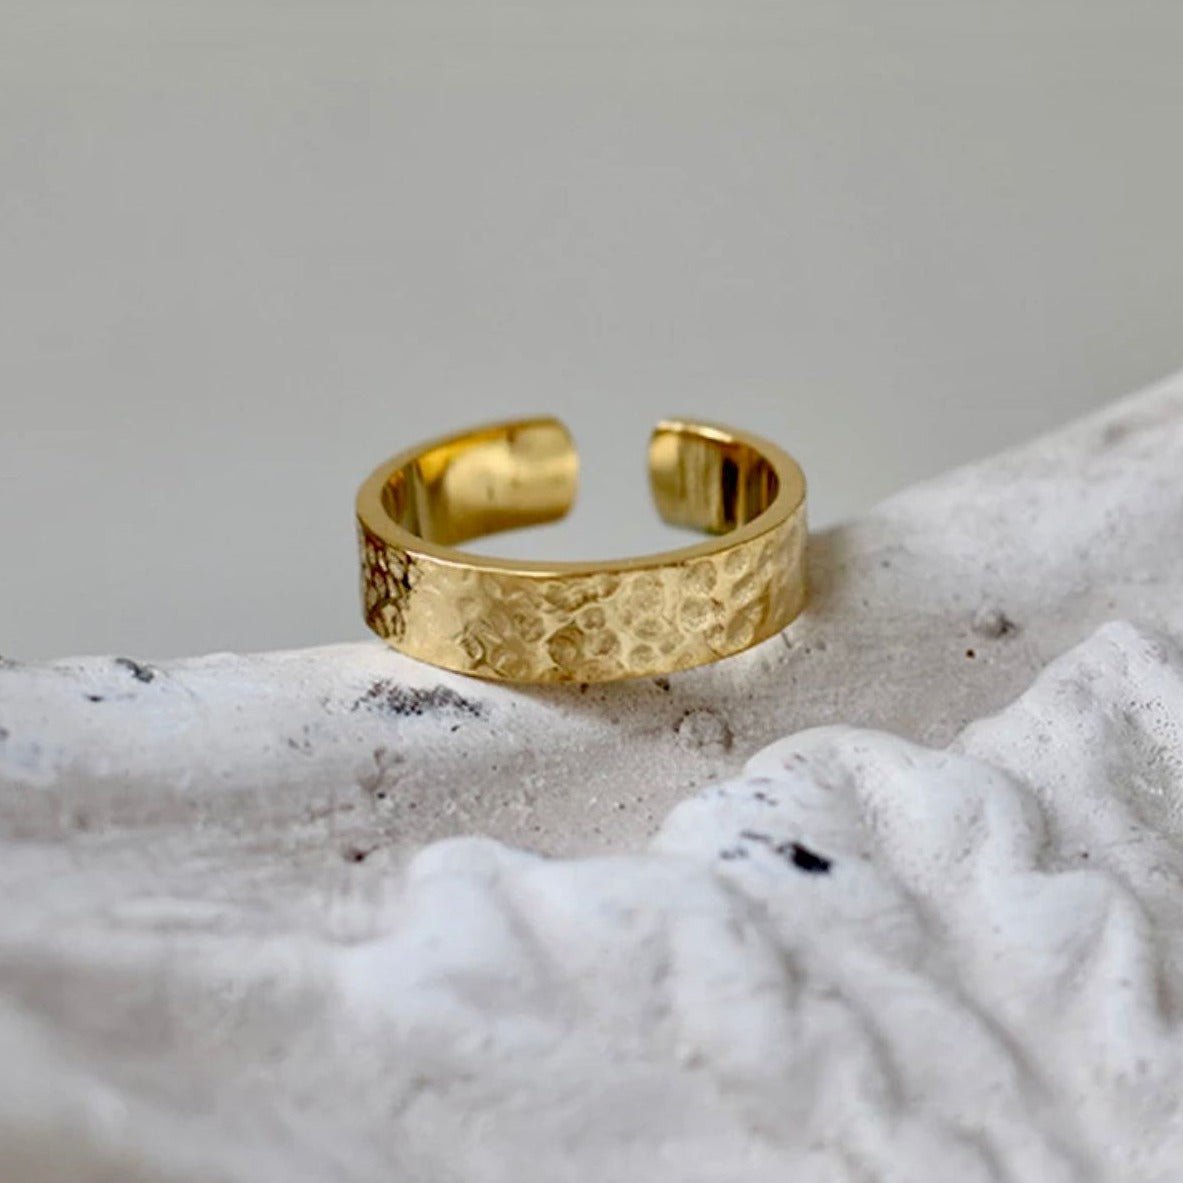 Hammered gold band from 1 oak jewelry